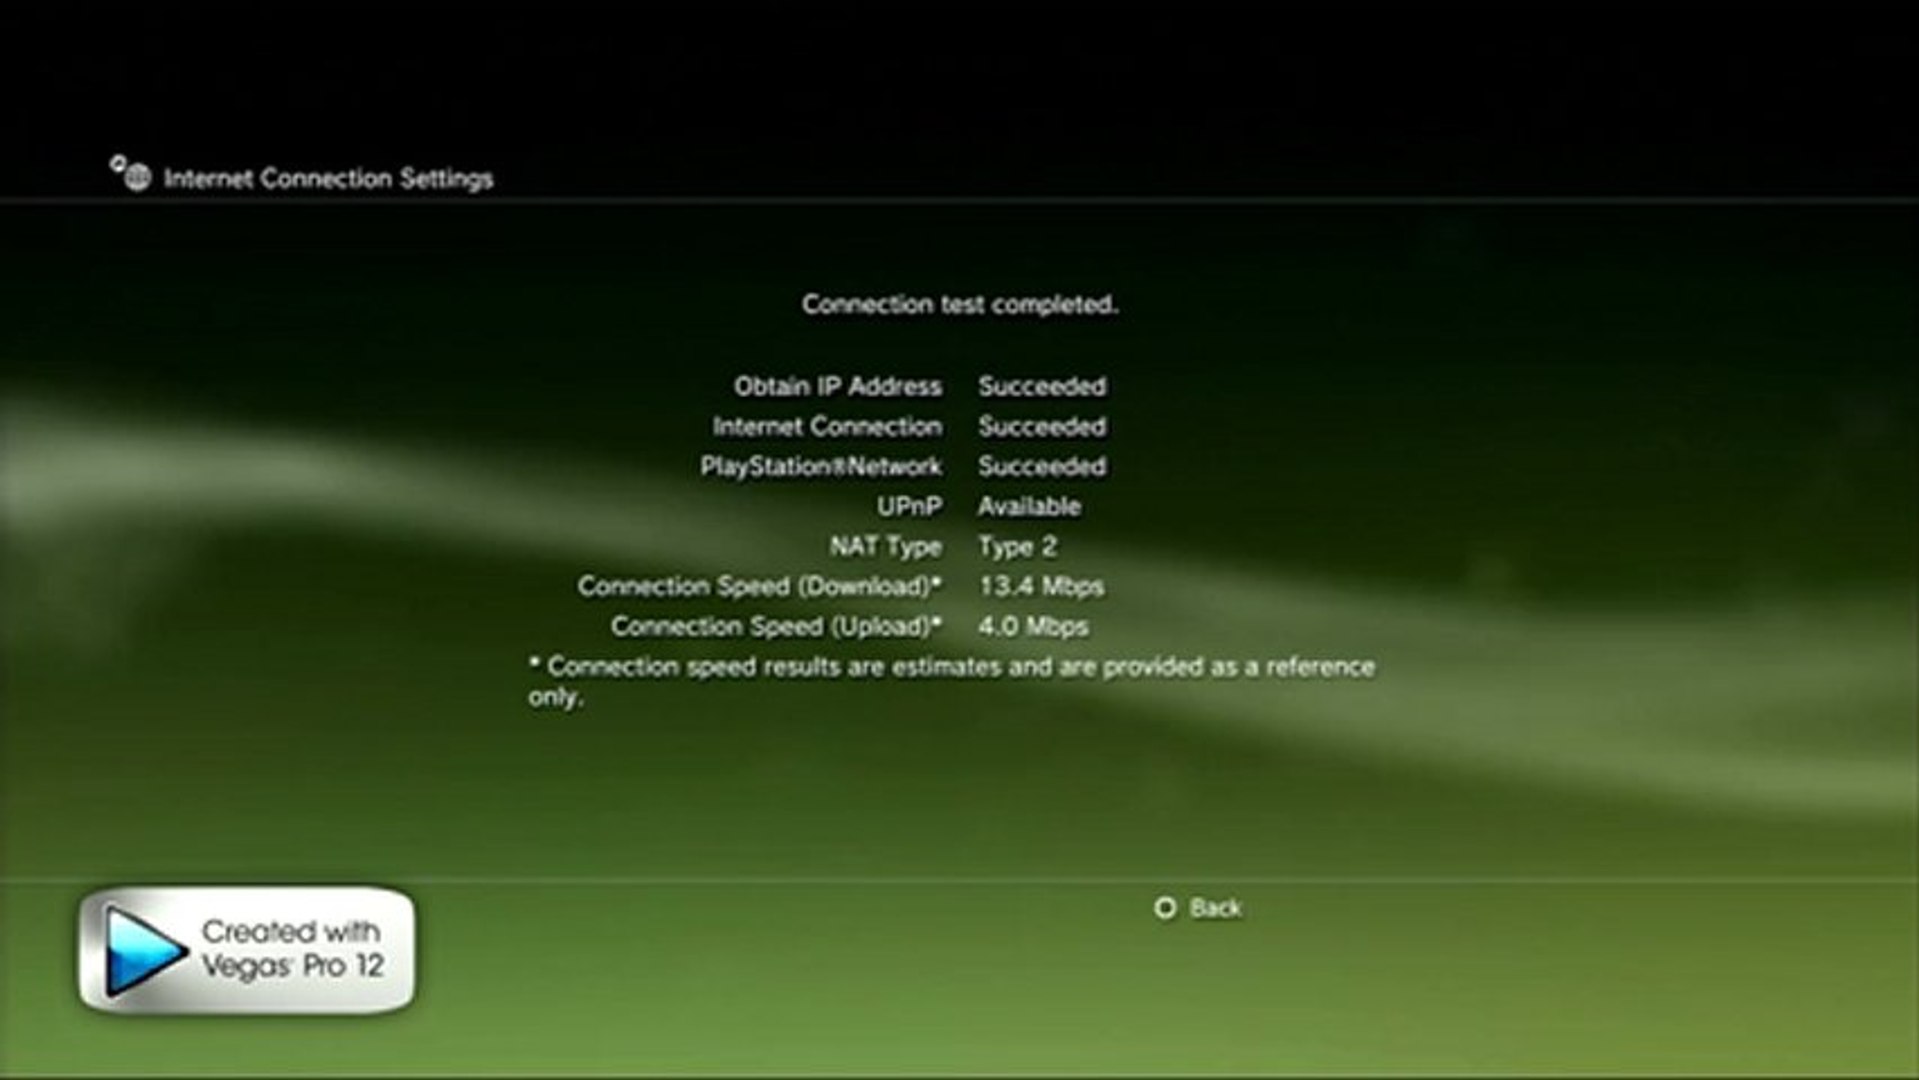 How to get Open NAT TYPE on ps3 xbox360 - video Dailymotion